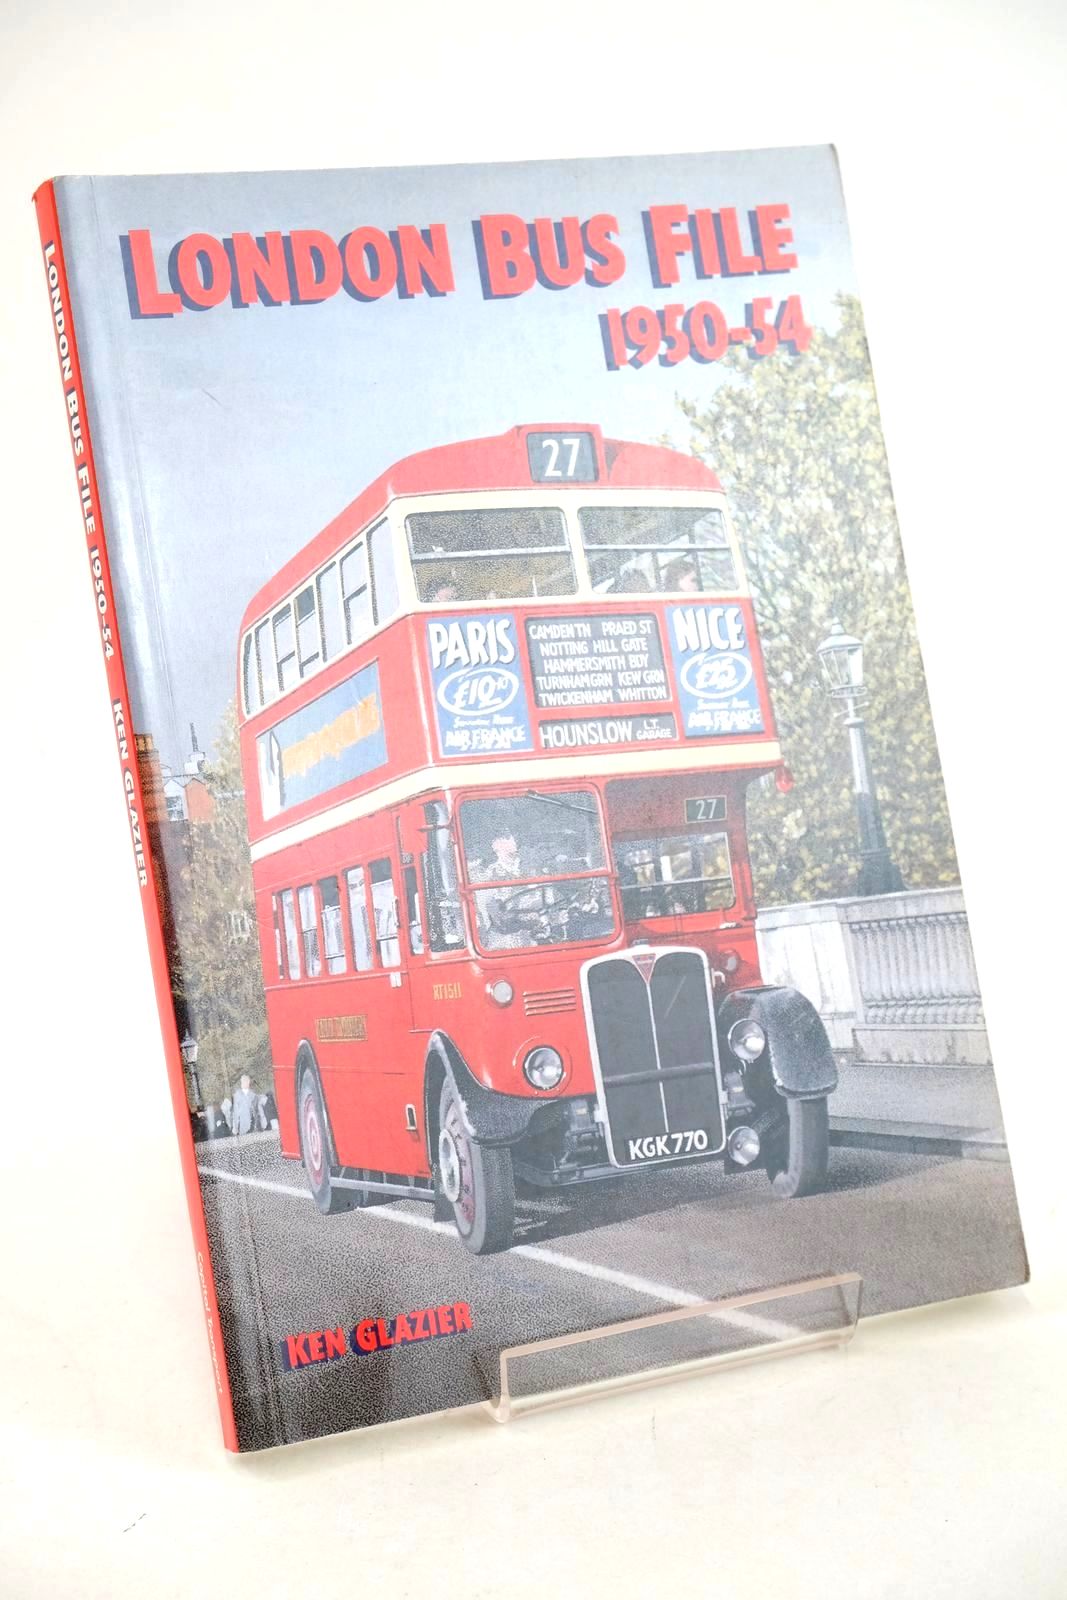 Photo of LONDON BUS FILE 1950-54 written by Glazier, Ken published by Capital Transport (STOCK CODE: 1326930)  for sale by Stella & Rose's Books